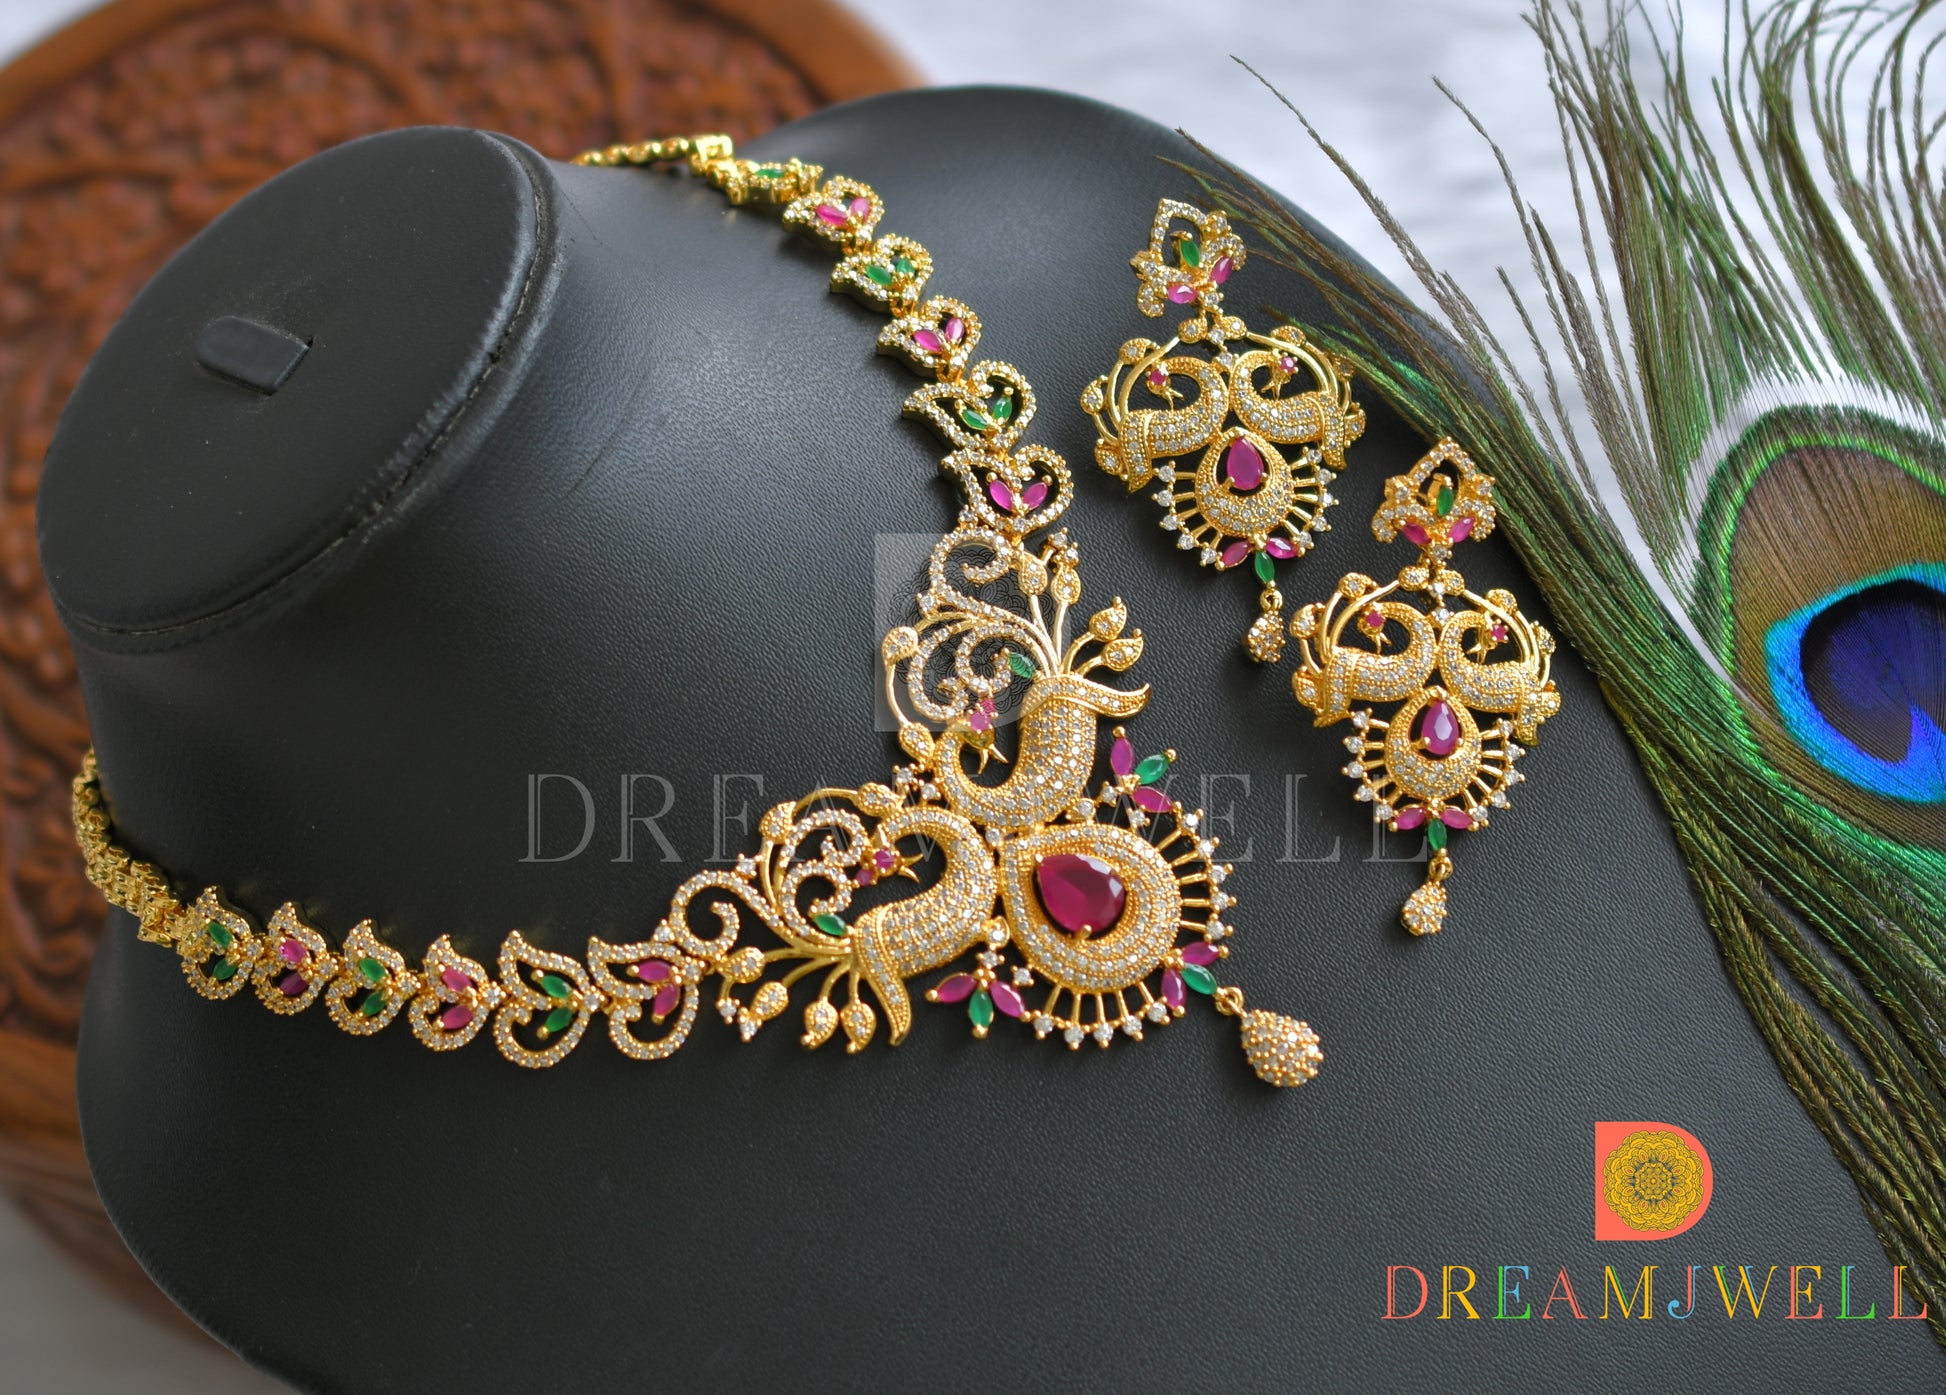 DREAMJWELL - Awesome Cz-ruby-emerald Bridal Peacock Necklace Set